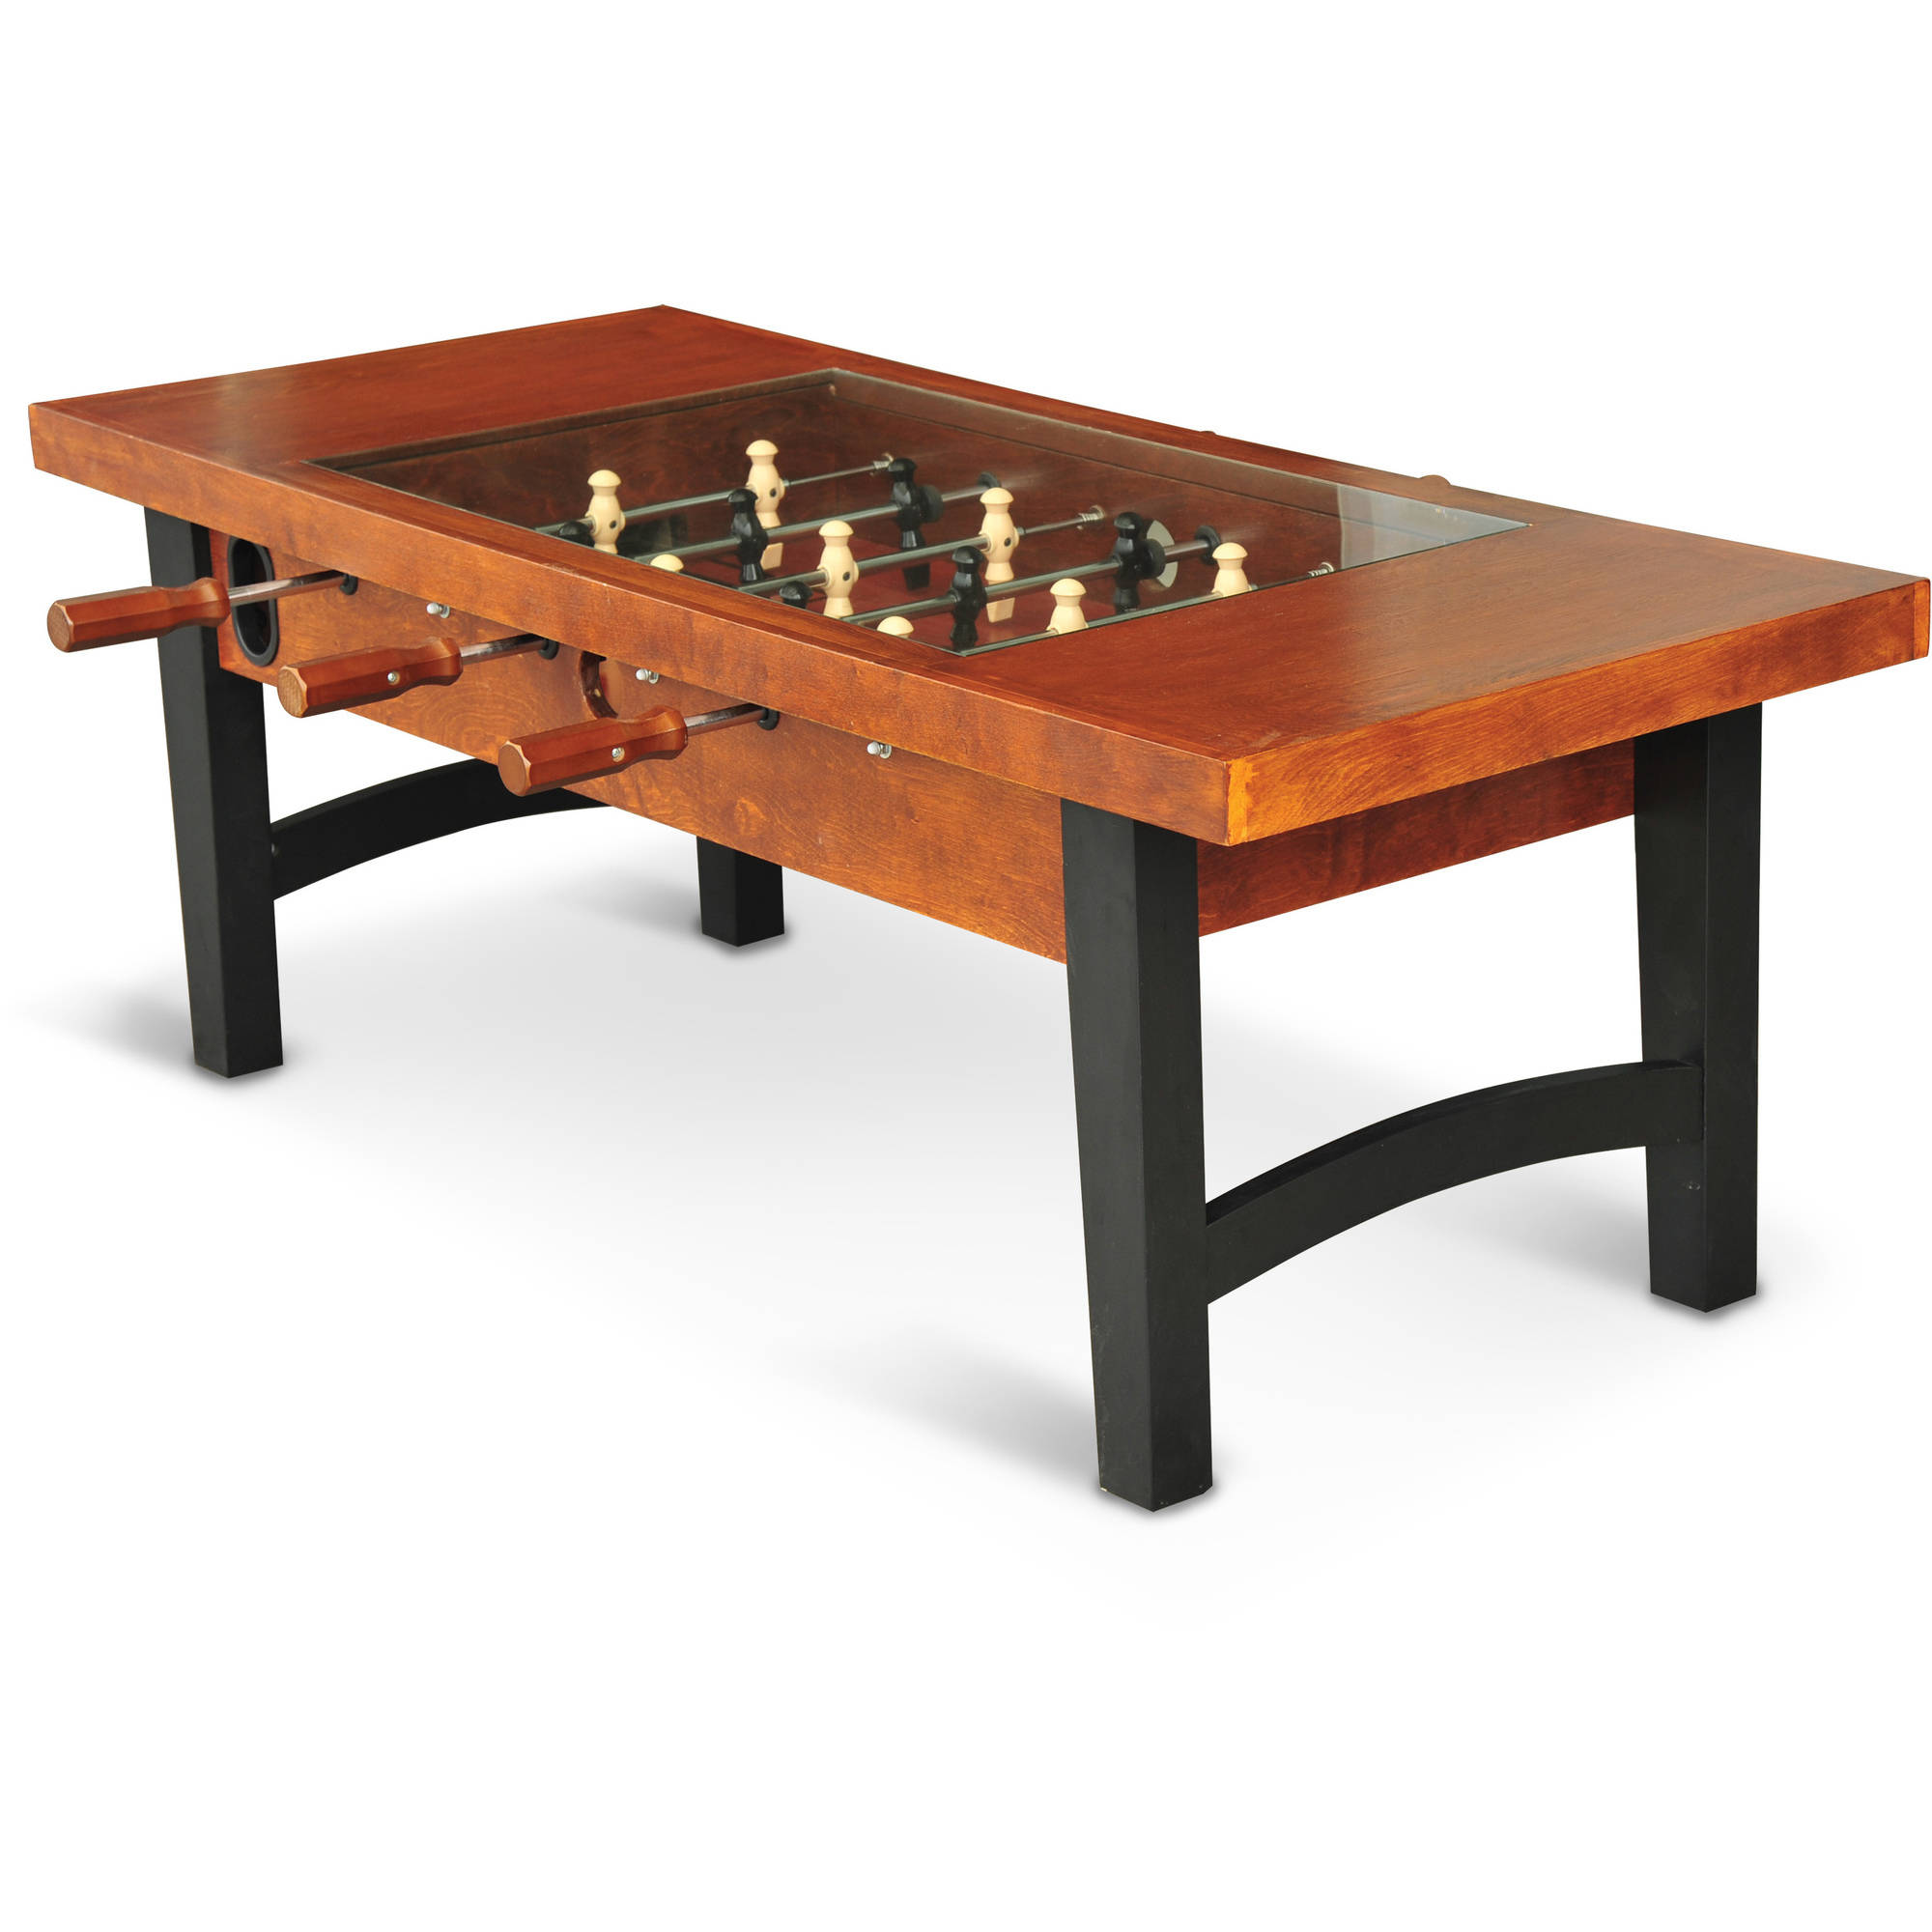 EastPoint Sports 55-inch Coffee Table Soccer Foosball Game Table - image 1 of 5